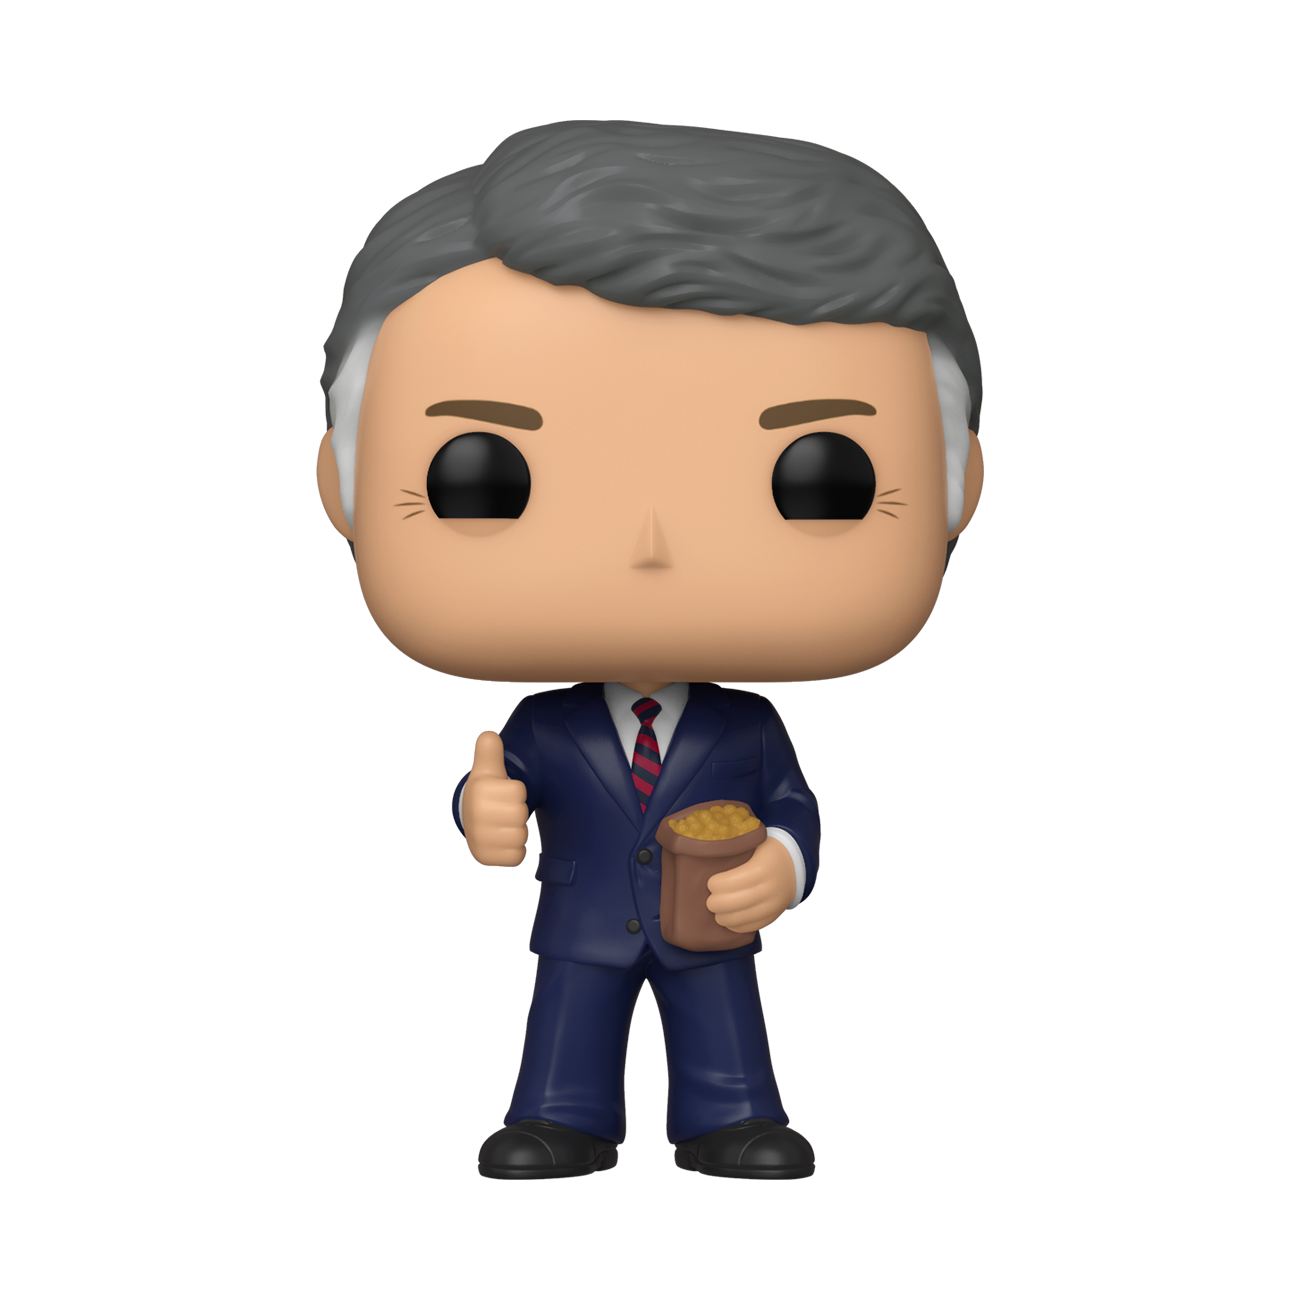 Funko POP! Icons: Jimmy Carter - image 1 of 2